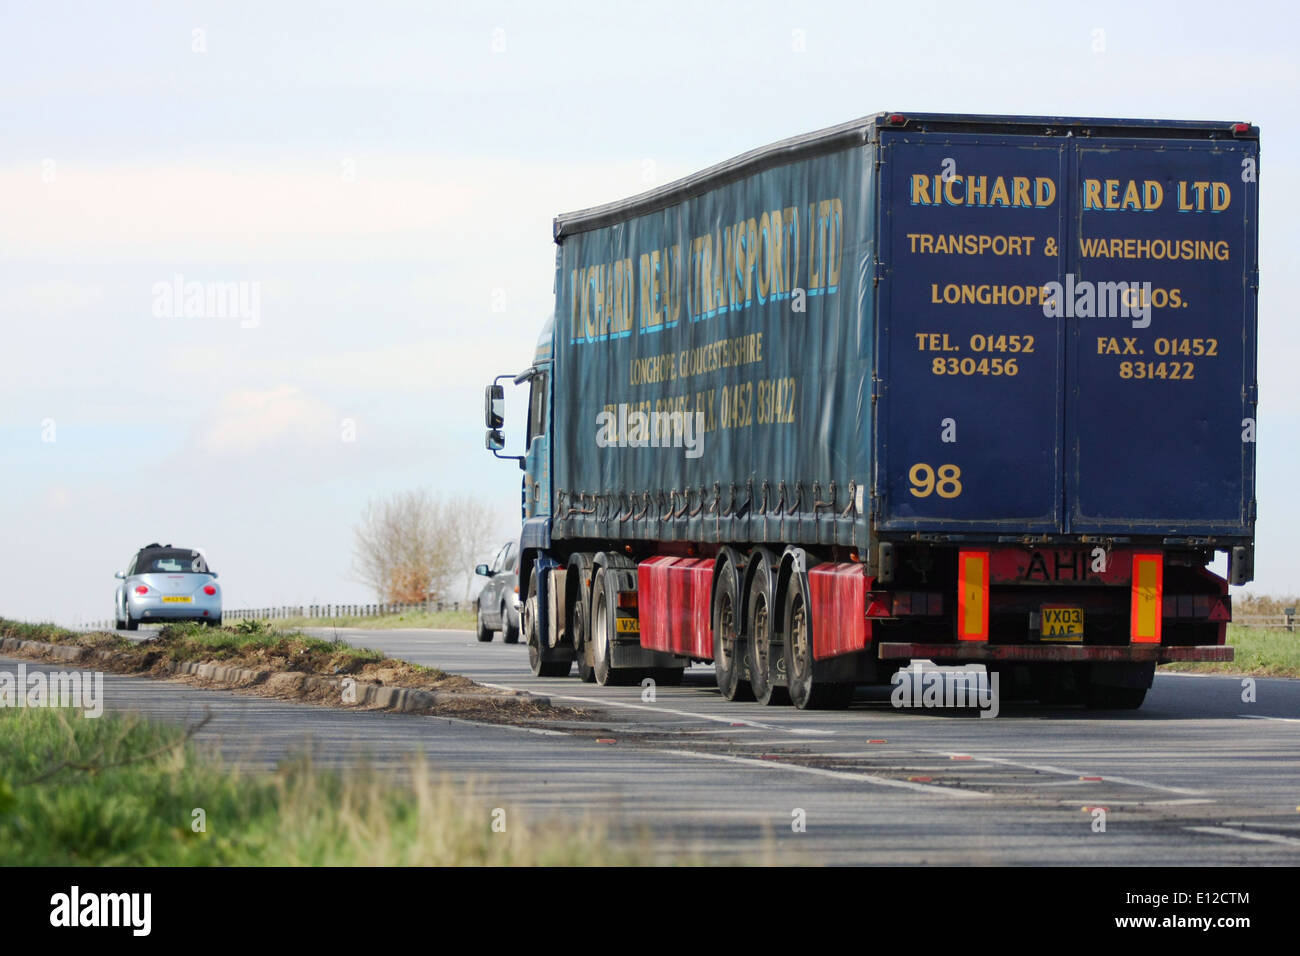 A Richard Read truck traveling along the A417 dual carriageway in The Cotswolds, England Stock Photo